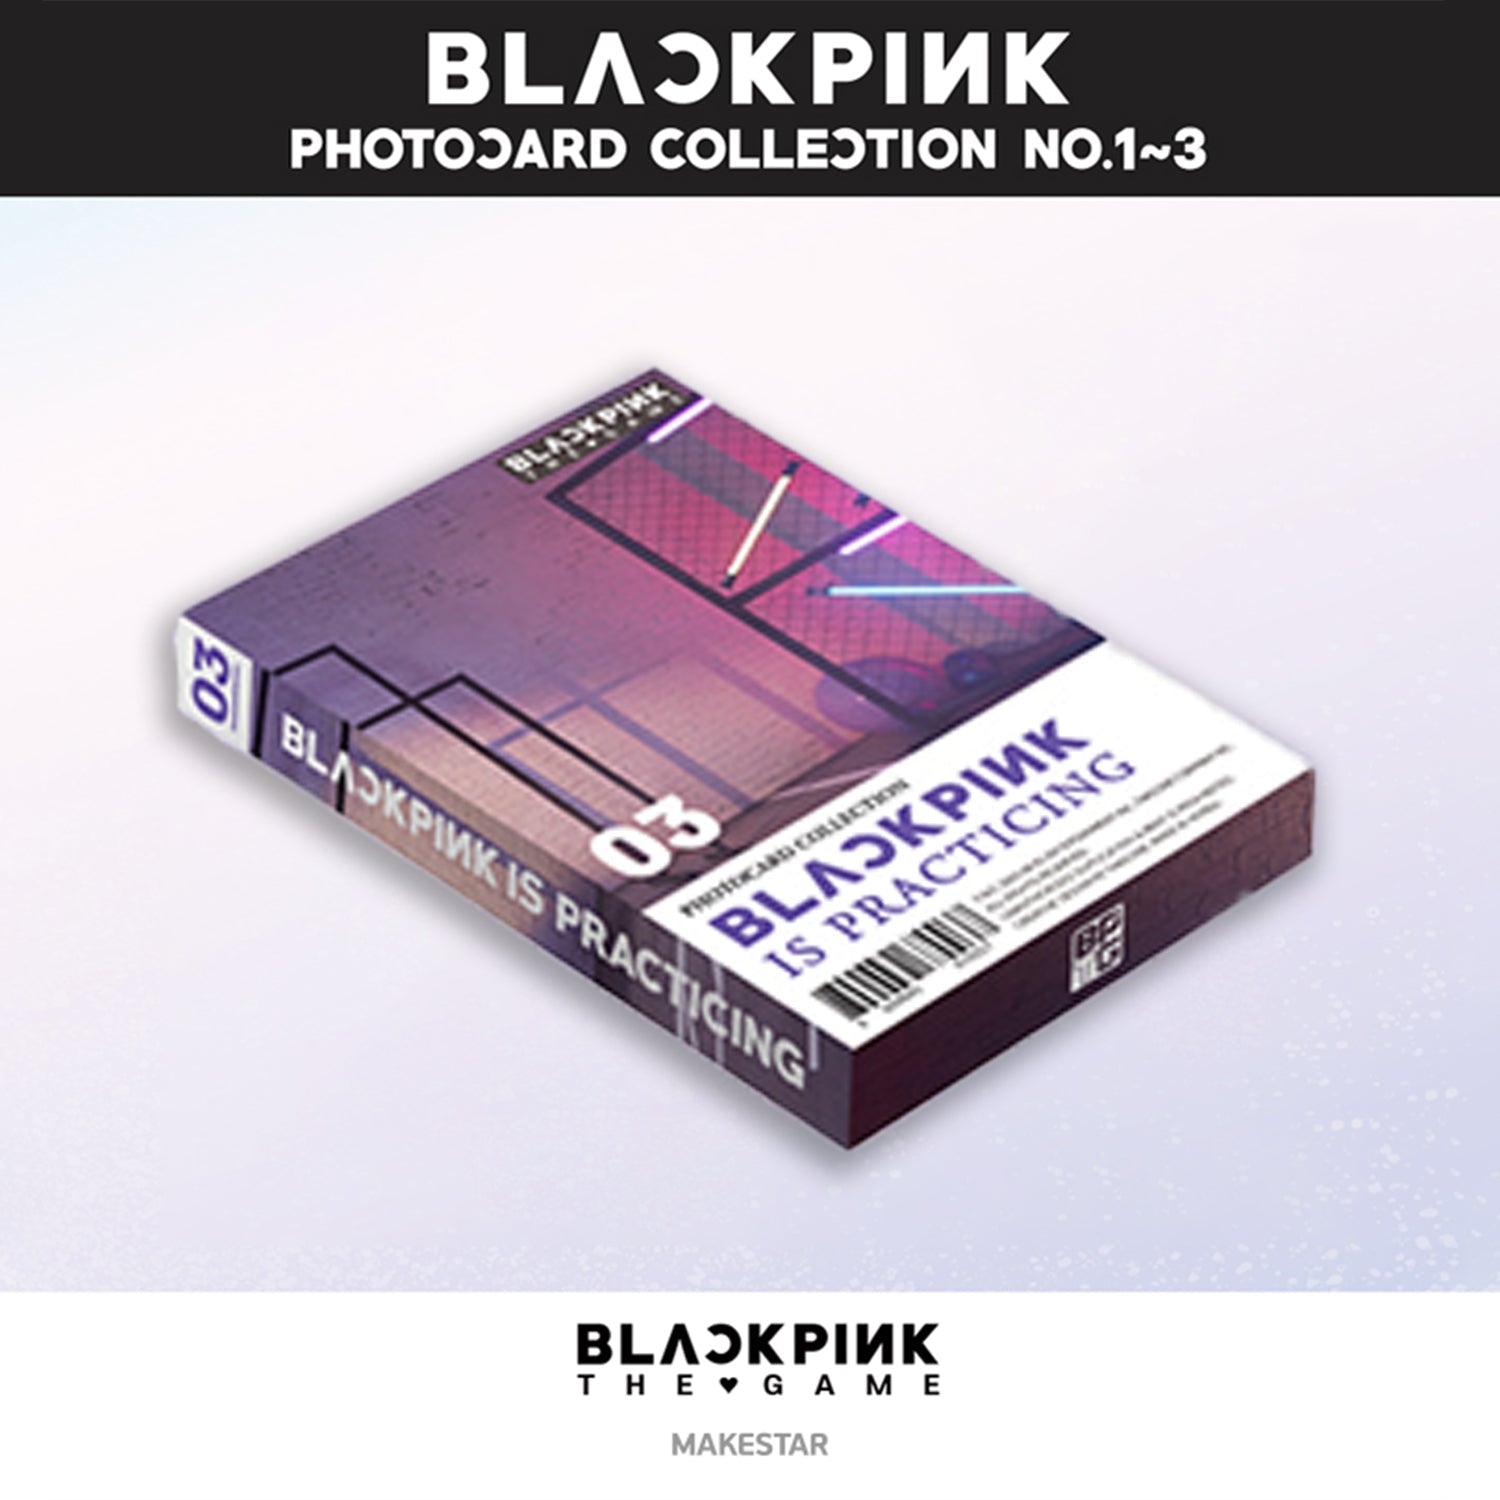 BLACKPINK THE GAME O.S.T. (PHOTOCARD COLLECTION) VERSION 3 COVER